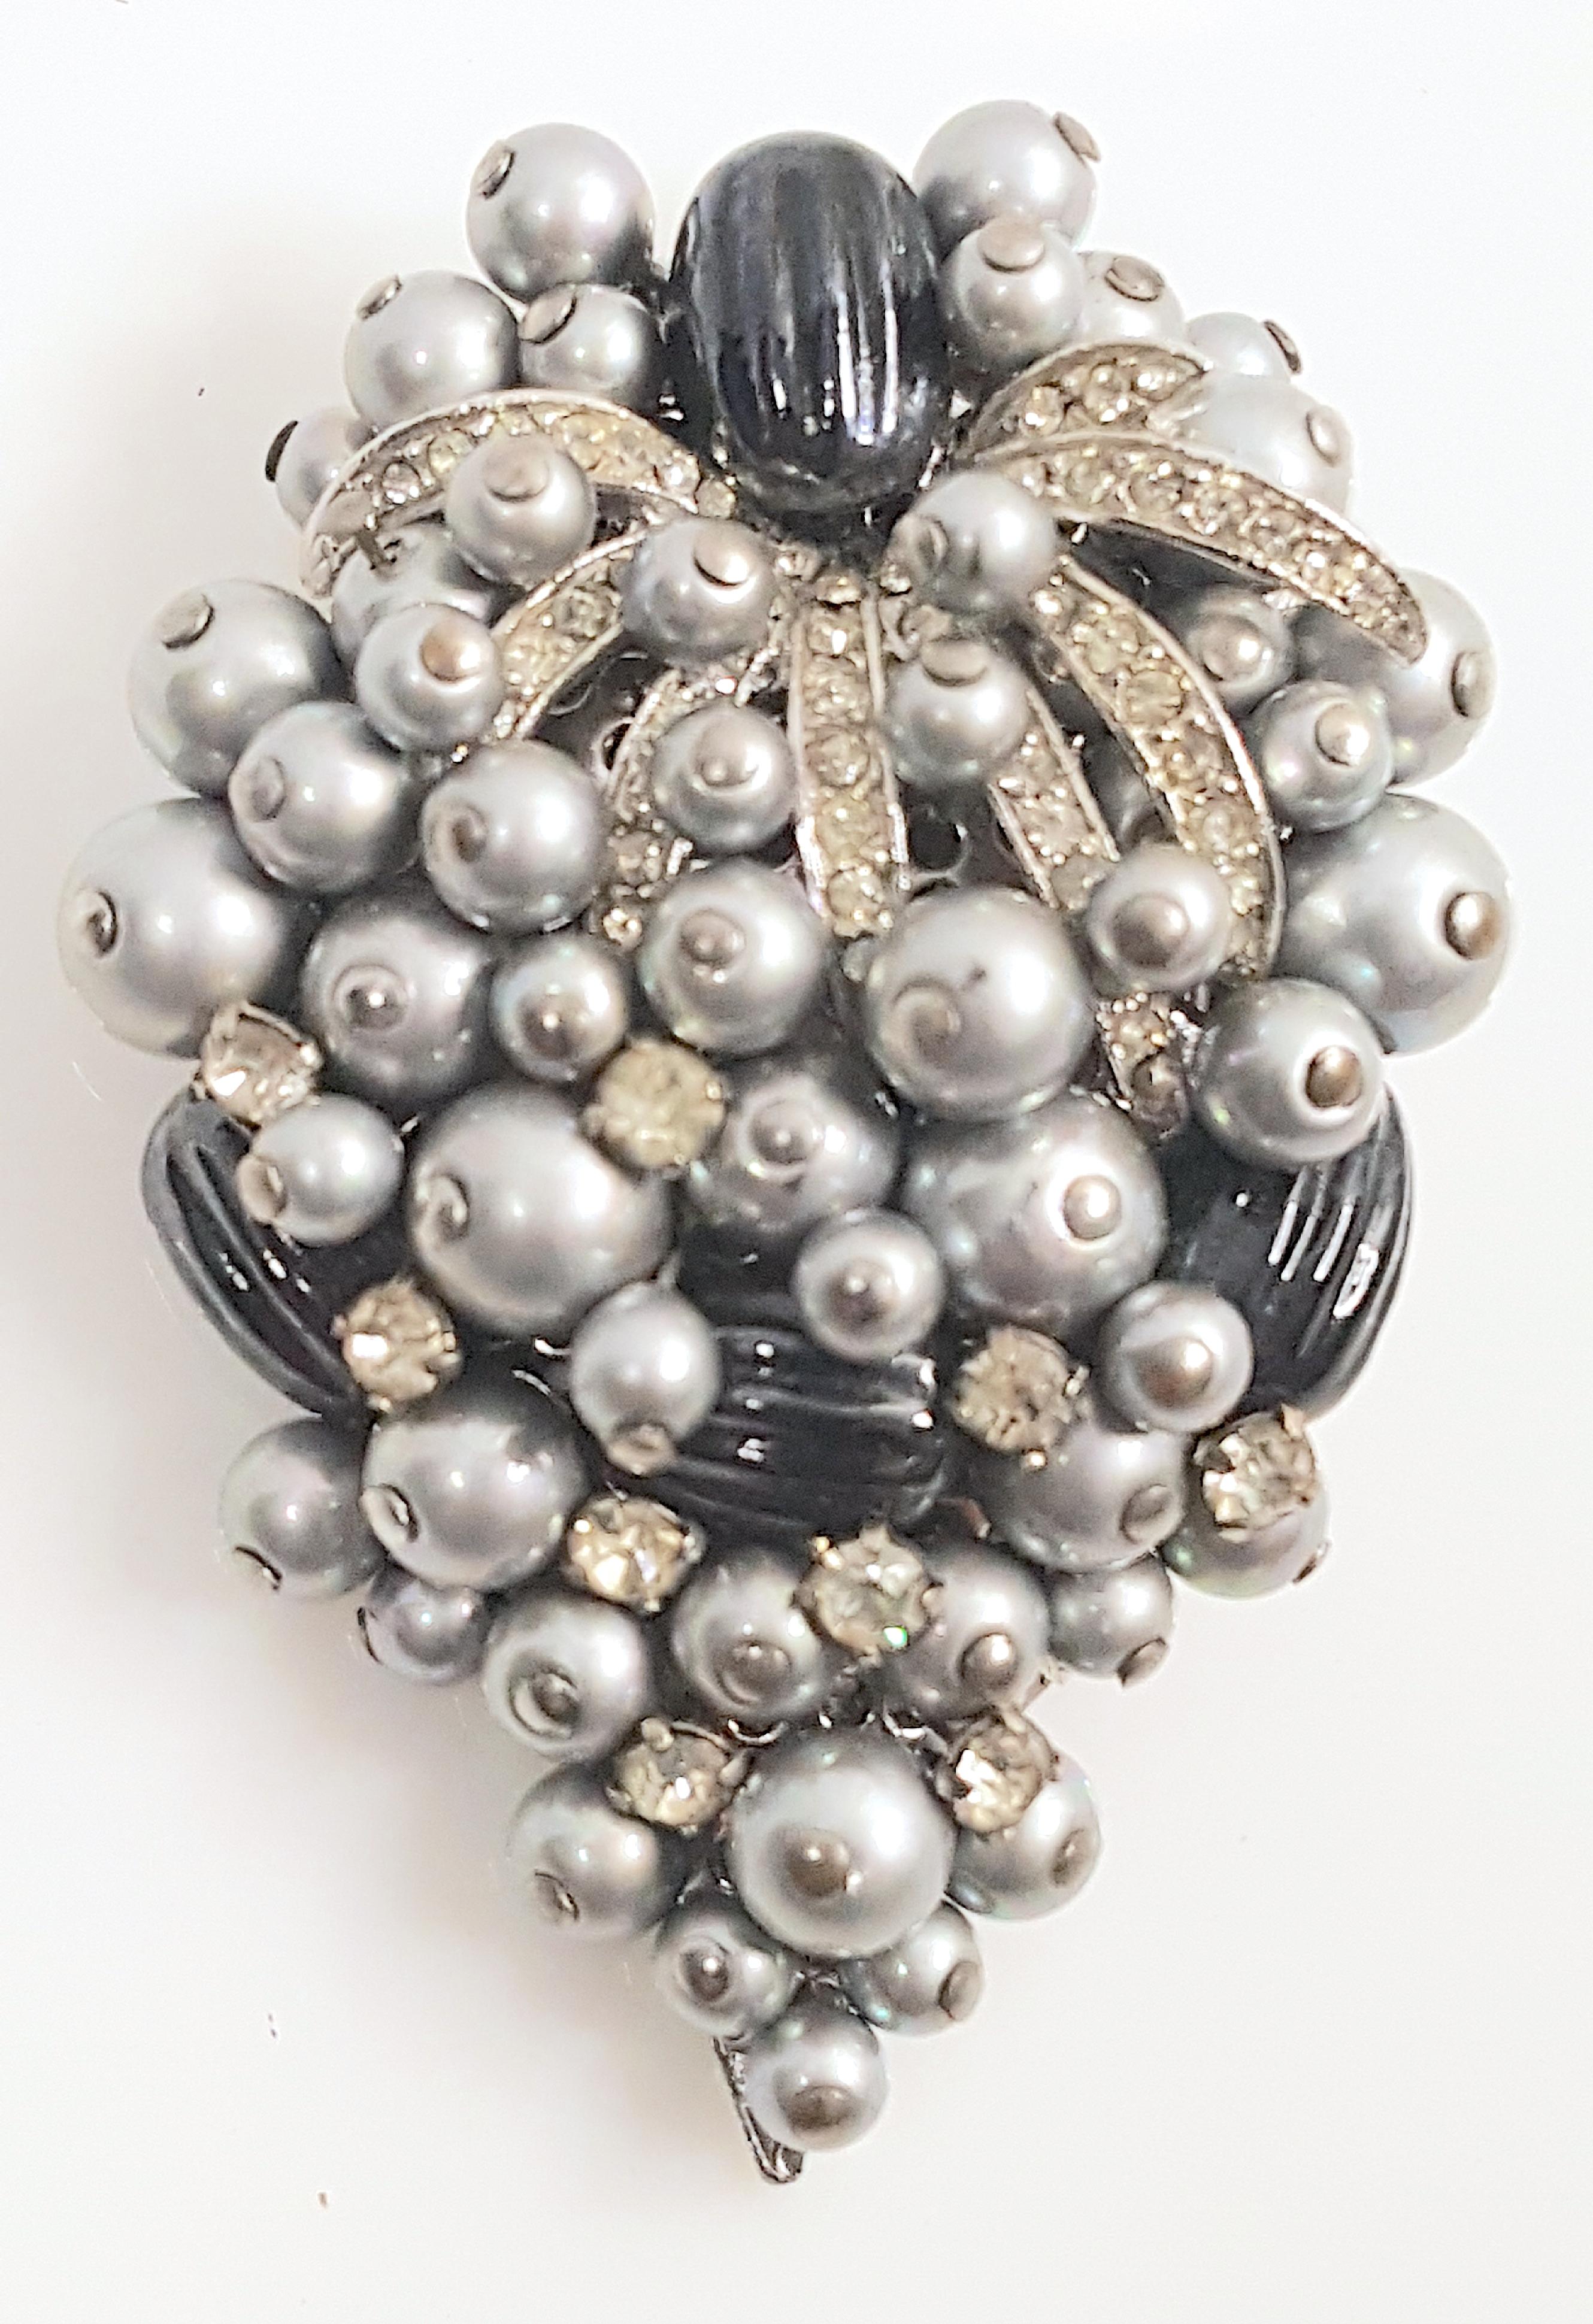 Mixed Cut Couture 1939-50 Schiaparelli-SchlumbergerStyle GlassBeads ProngSetCrystal Brooch For Sale